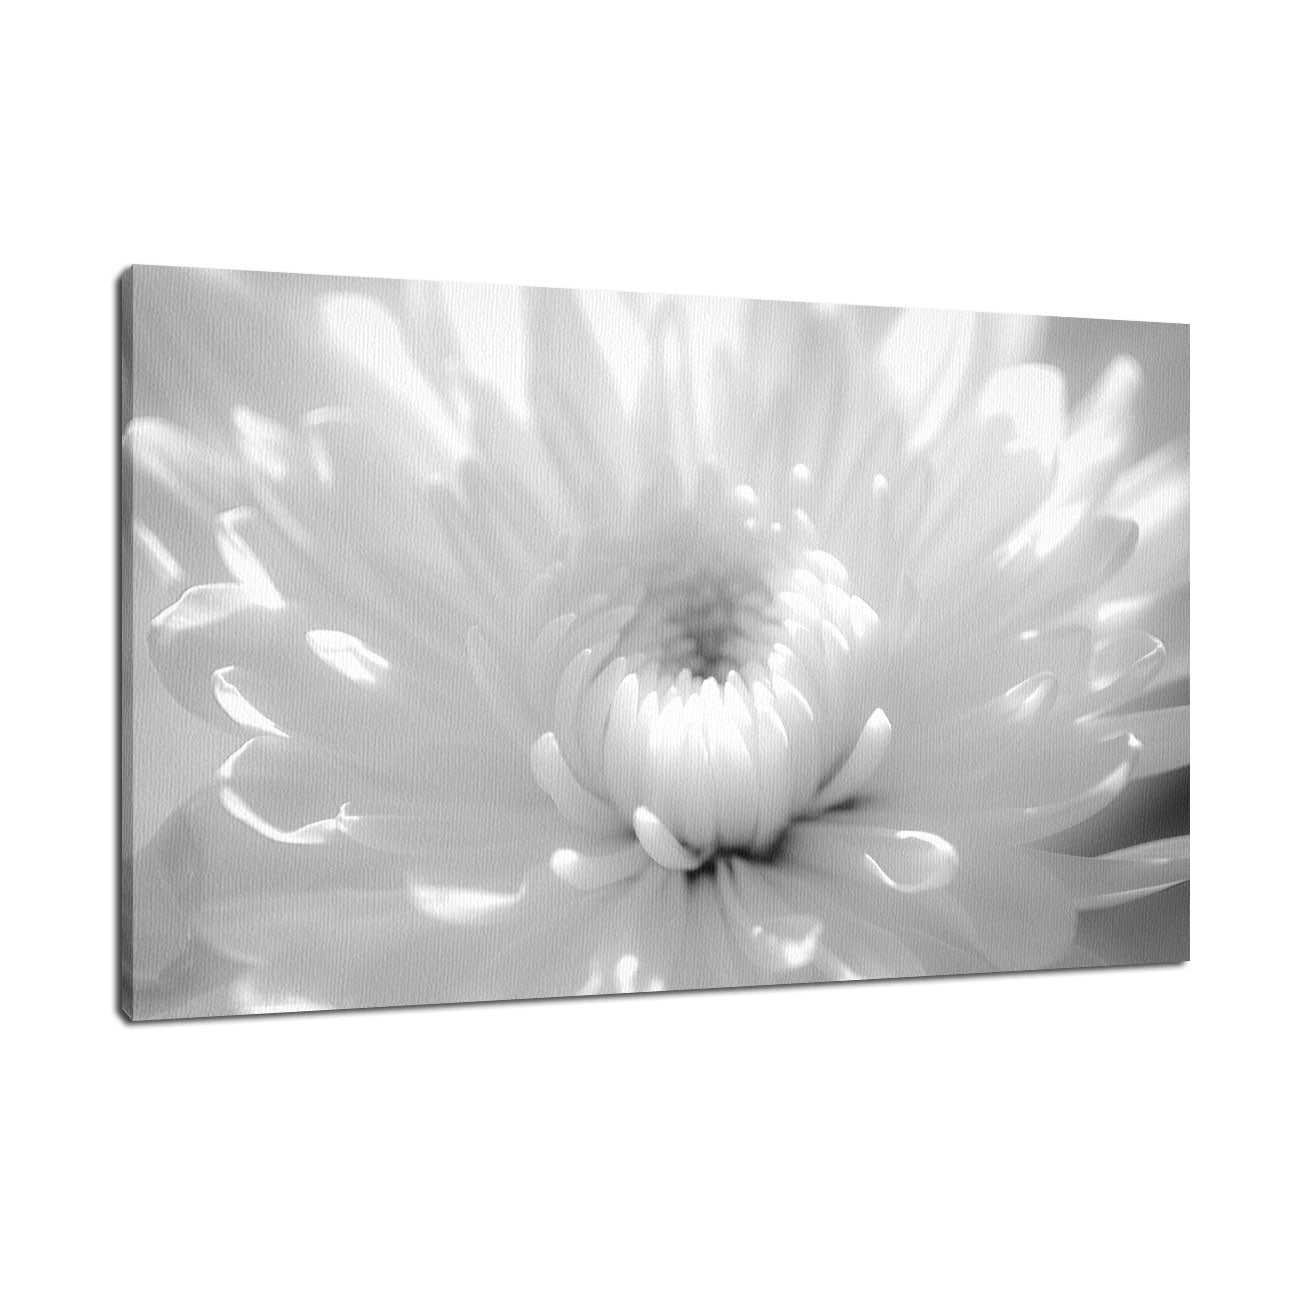 Infrared Flower 2 Nature / Floral Photo Fine Art Canvas Wall Art Prints  - PIPAFINEART